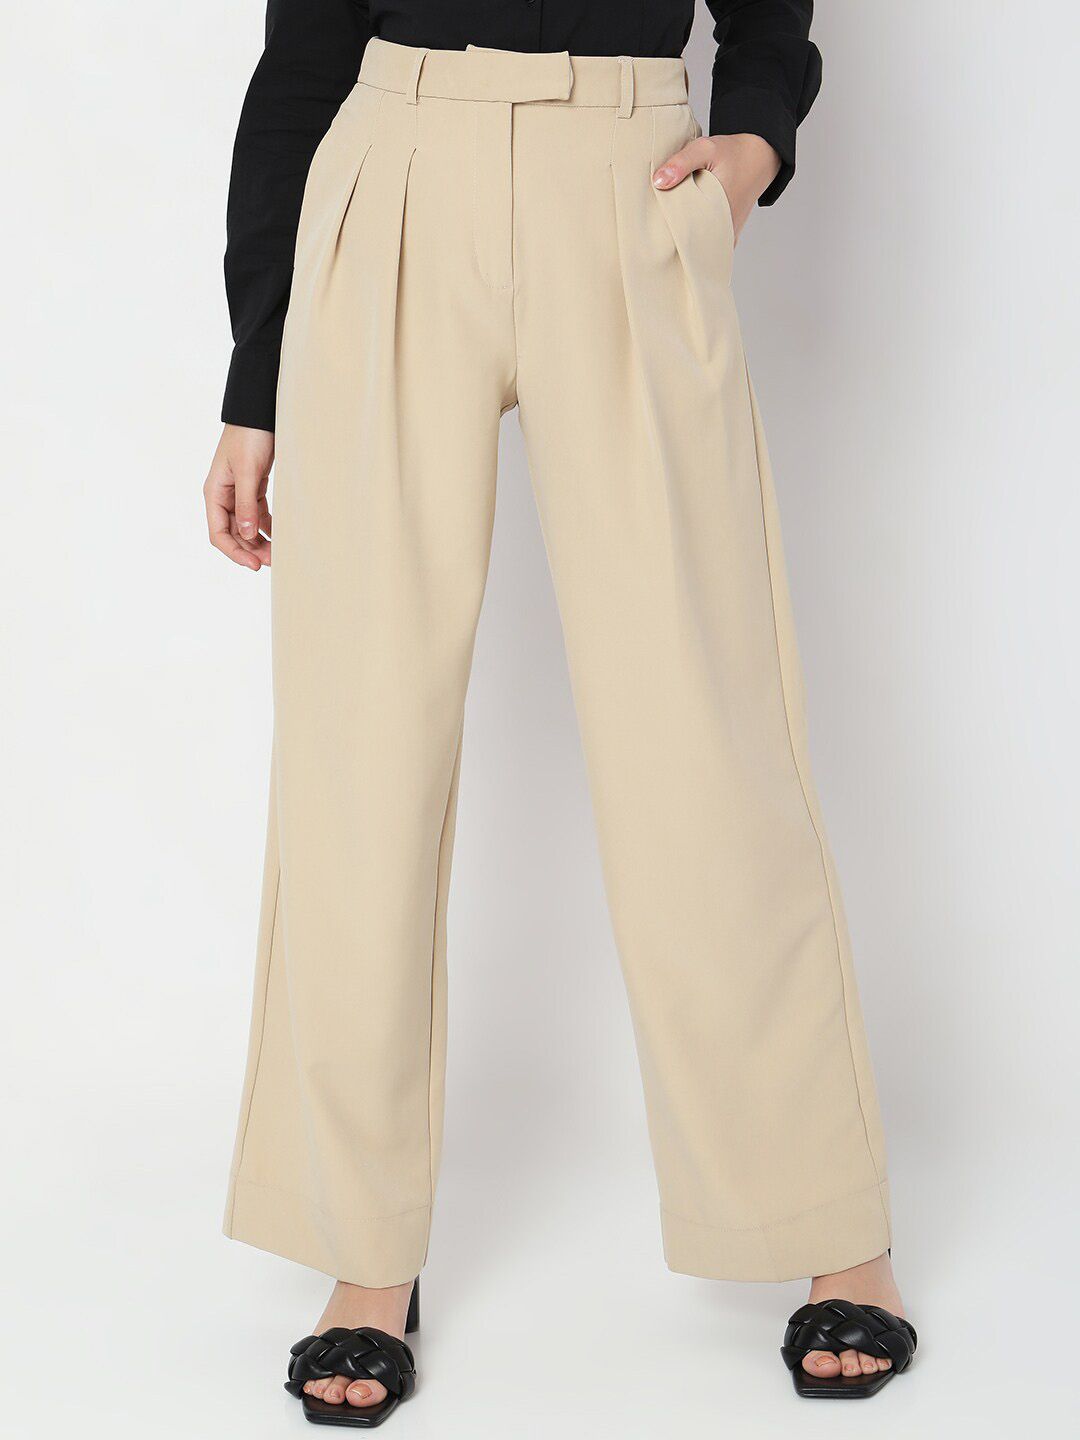 Vero Moda Women High-Rise Pleated Parallel Trousers Price in India